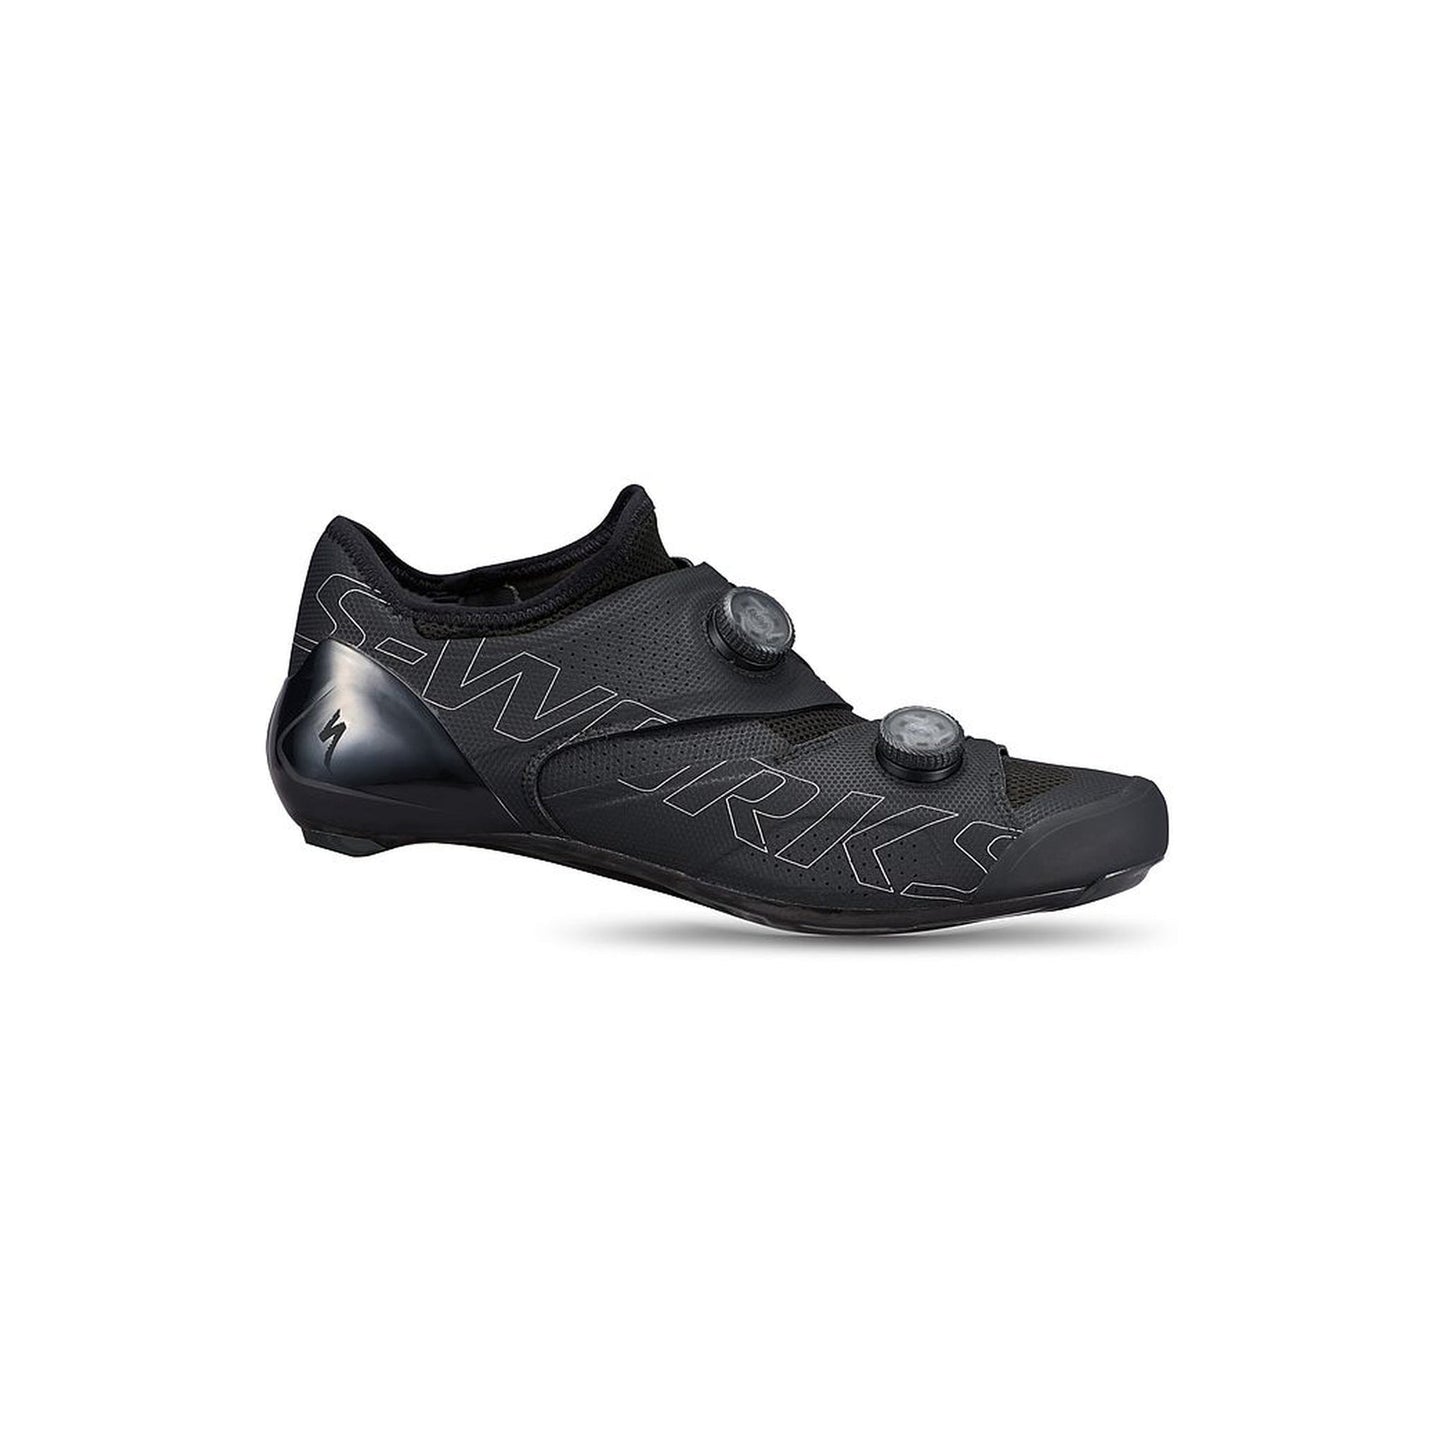 S-Works Ares Road Shoes-Cycles Direct Specialized